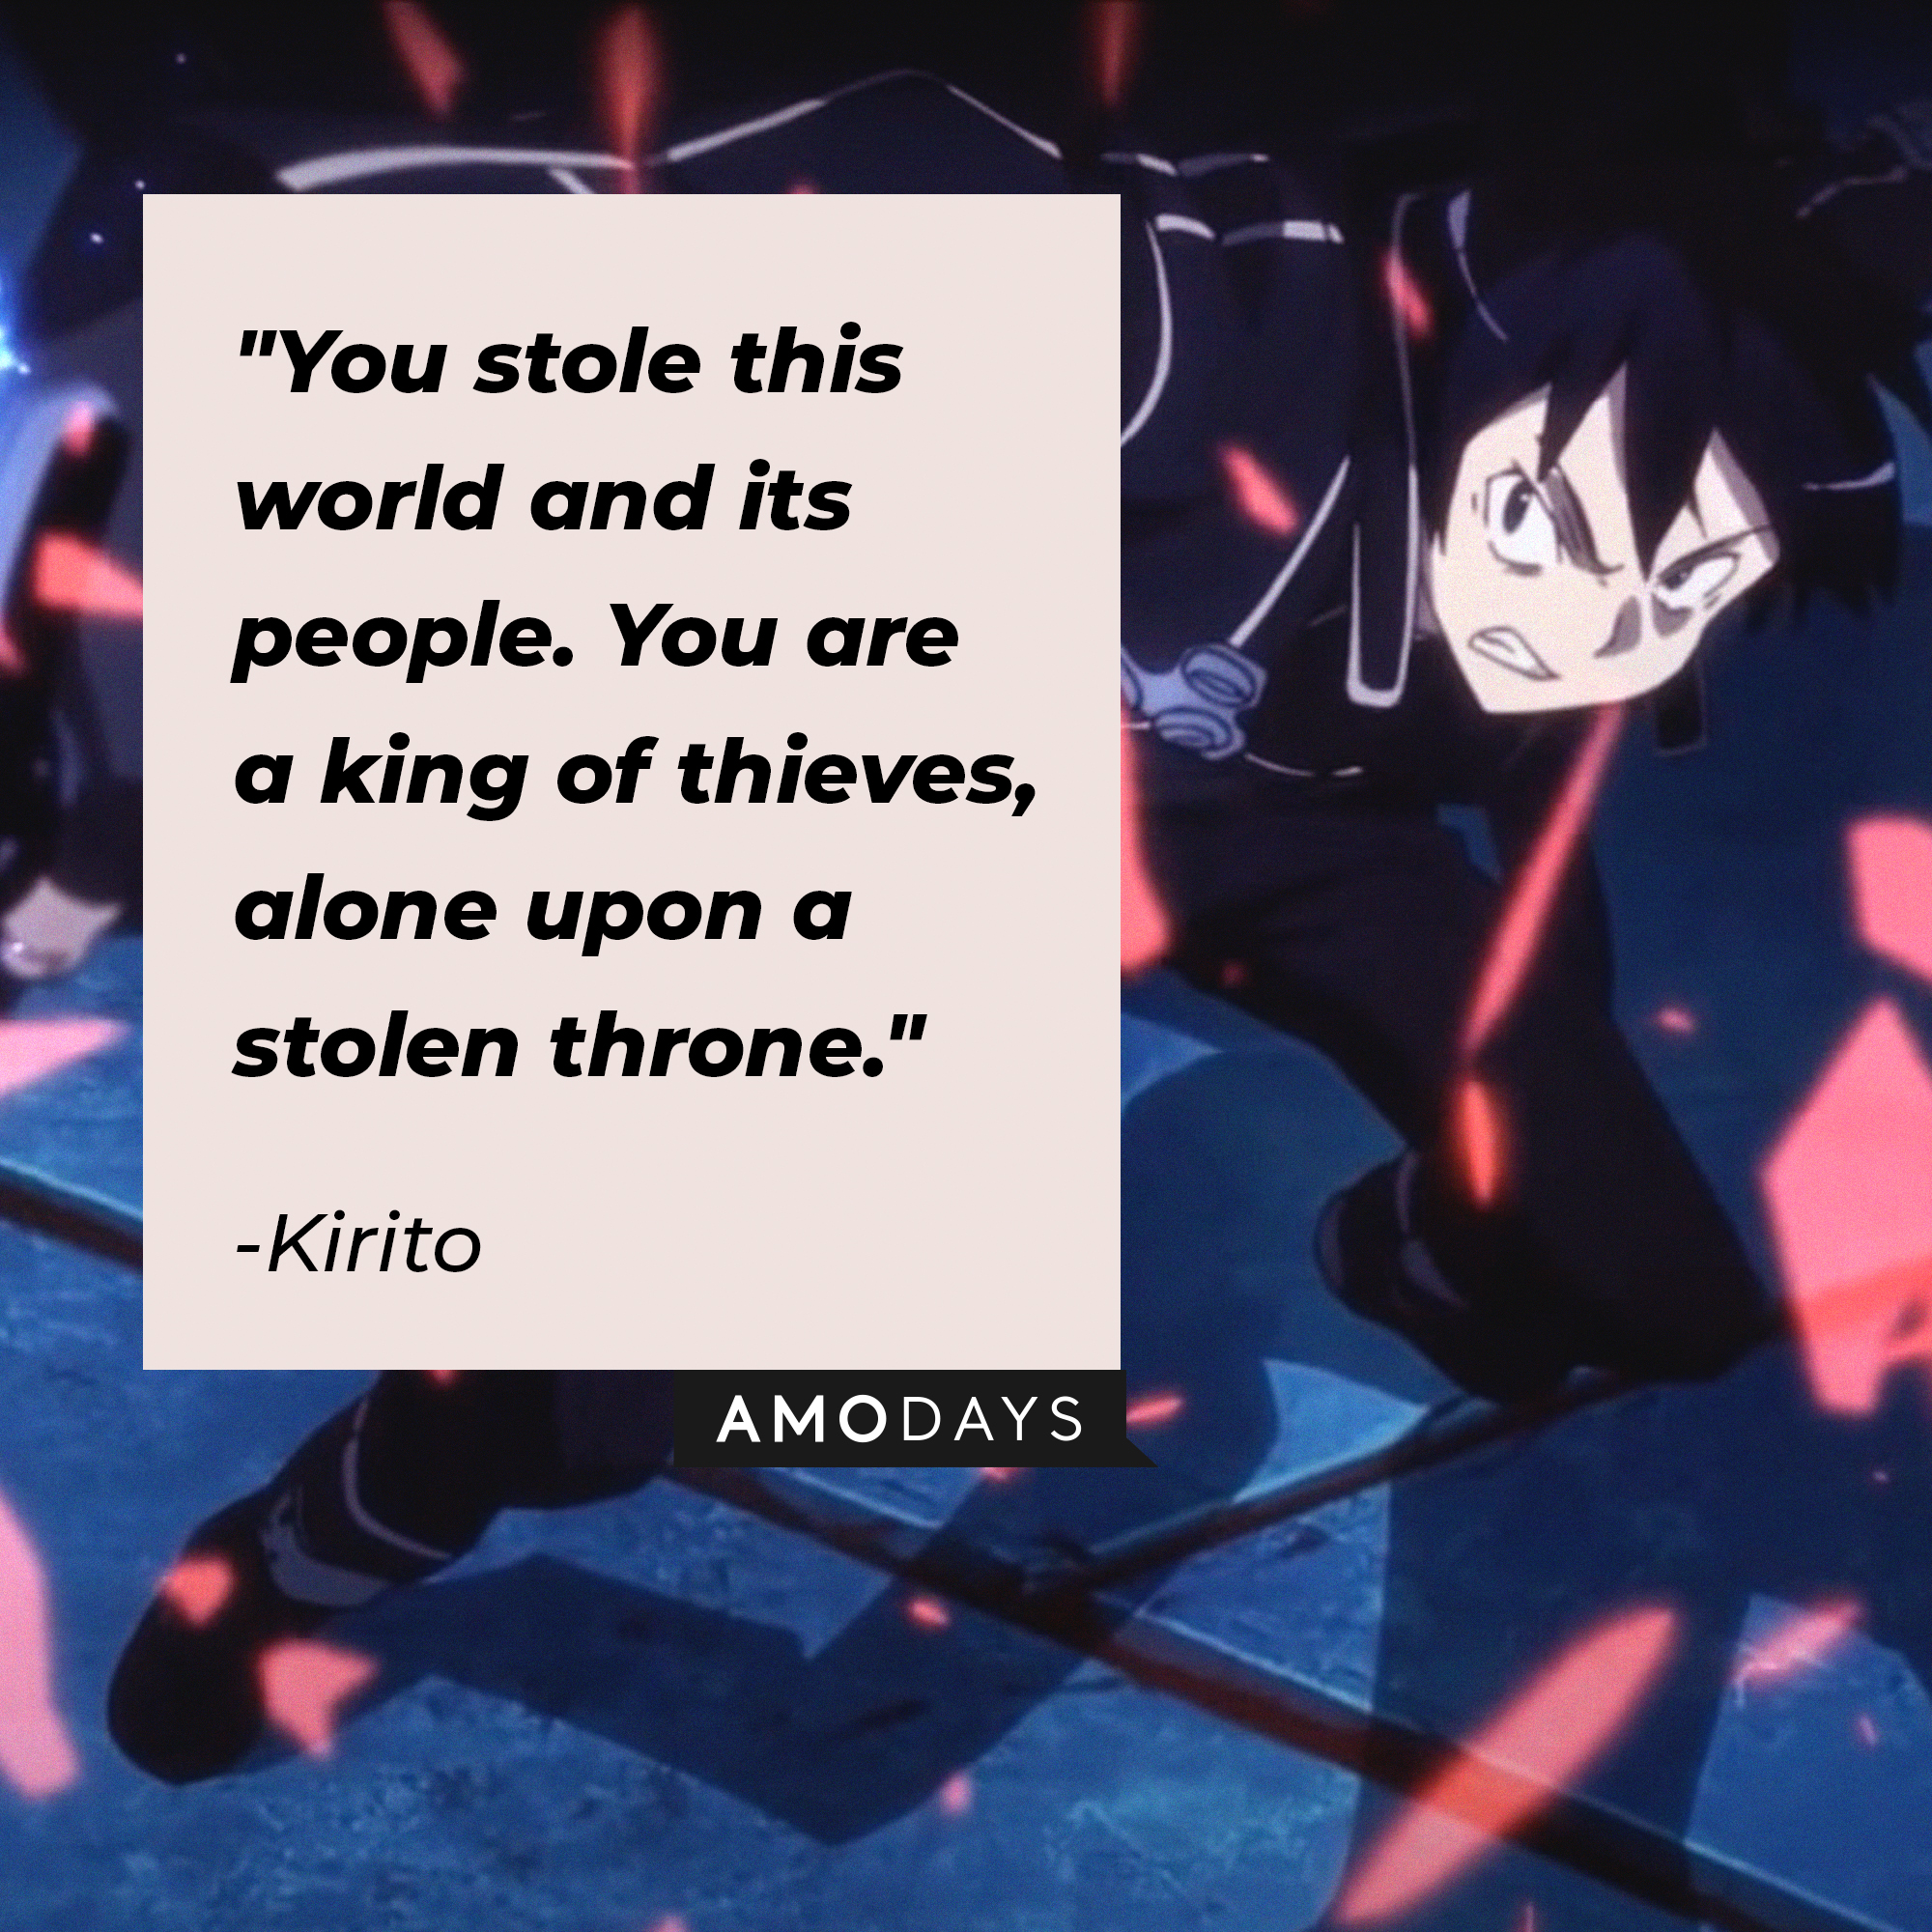 Kirito's quote: "You stole this world and its people. You are a king of thieves, alone upon a stolen throne." | Source: Facebook.com/SwordArtOnlineUSA